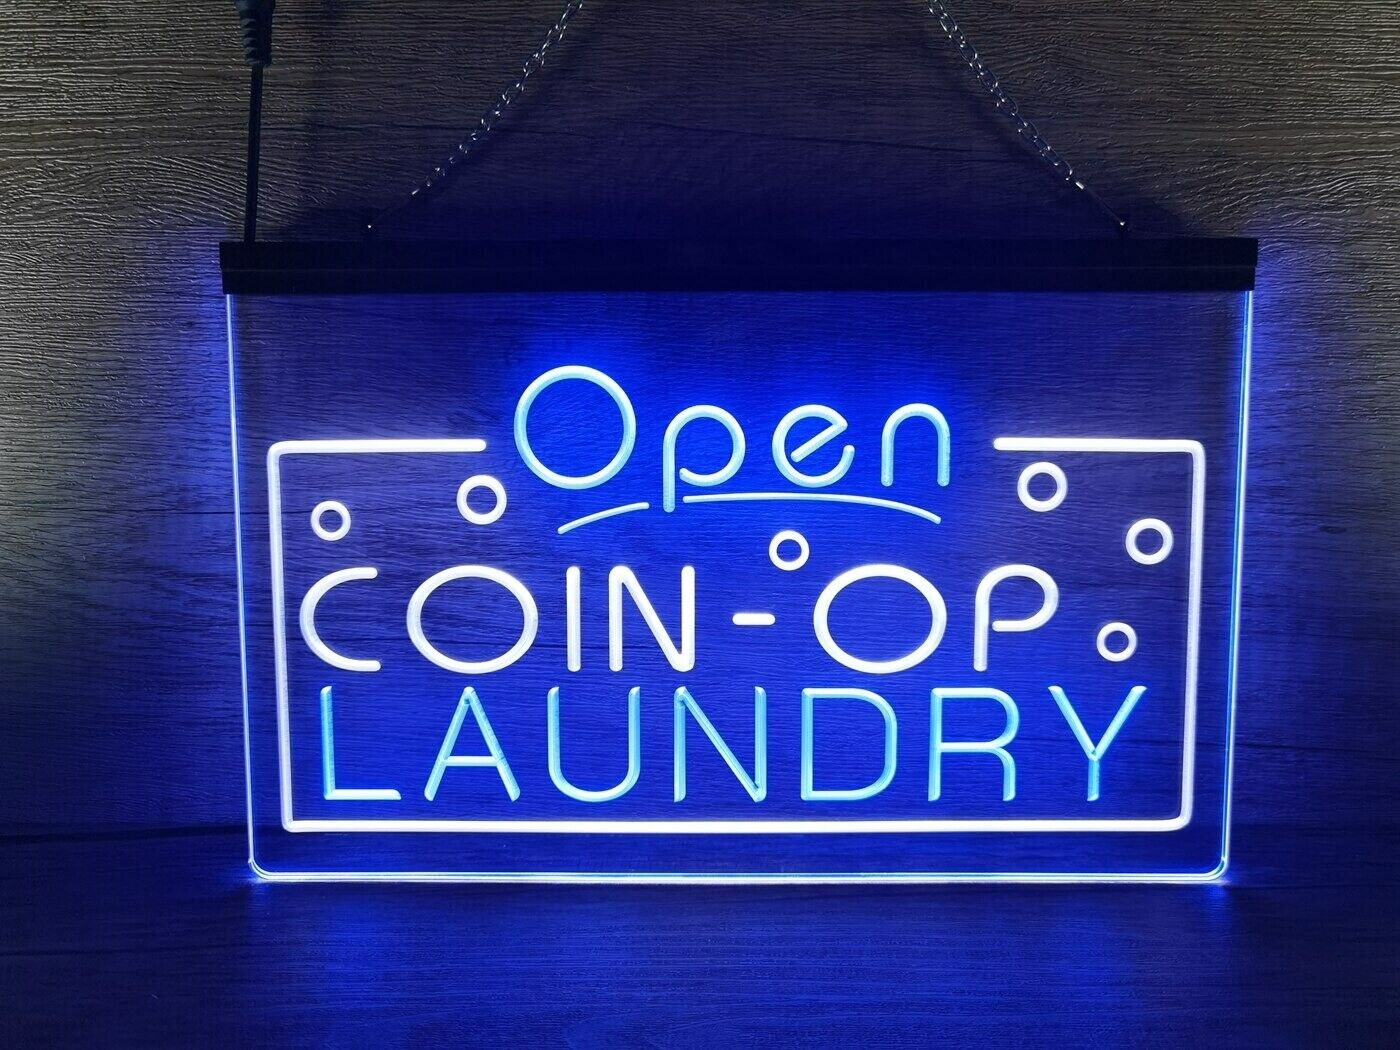 Open Coin Op Laundry LED Neon Sign Wall Light Dry Clean Advertise Display Décor